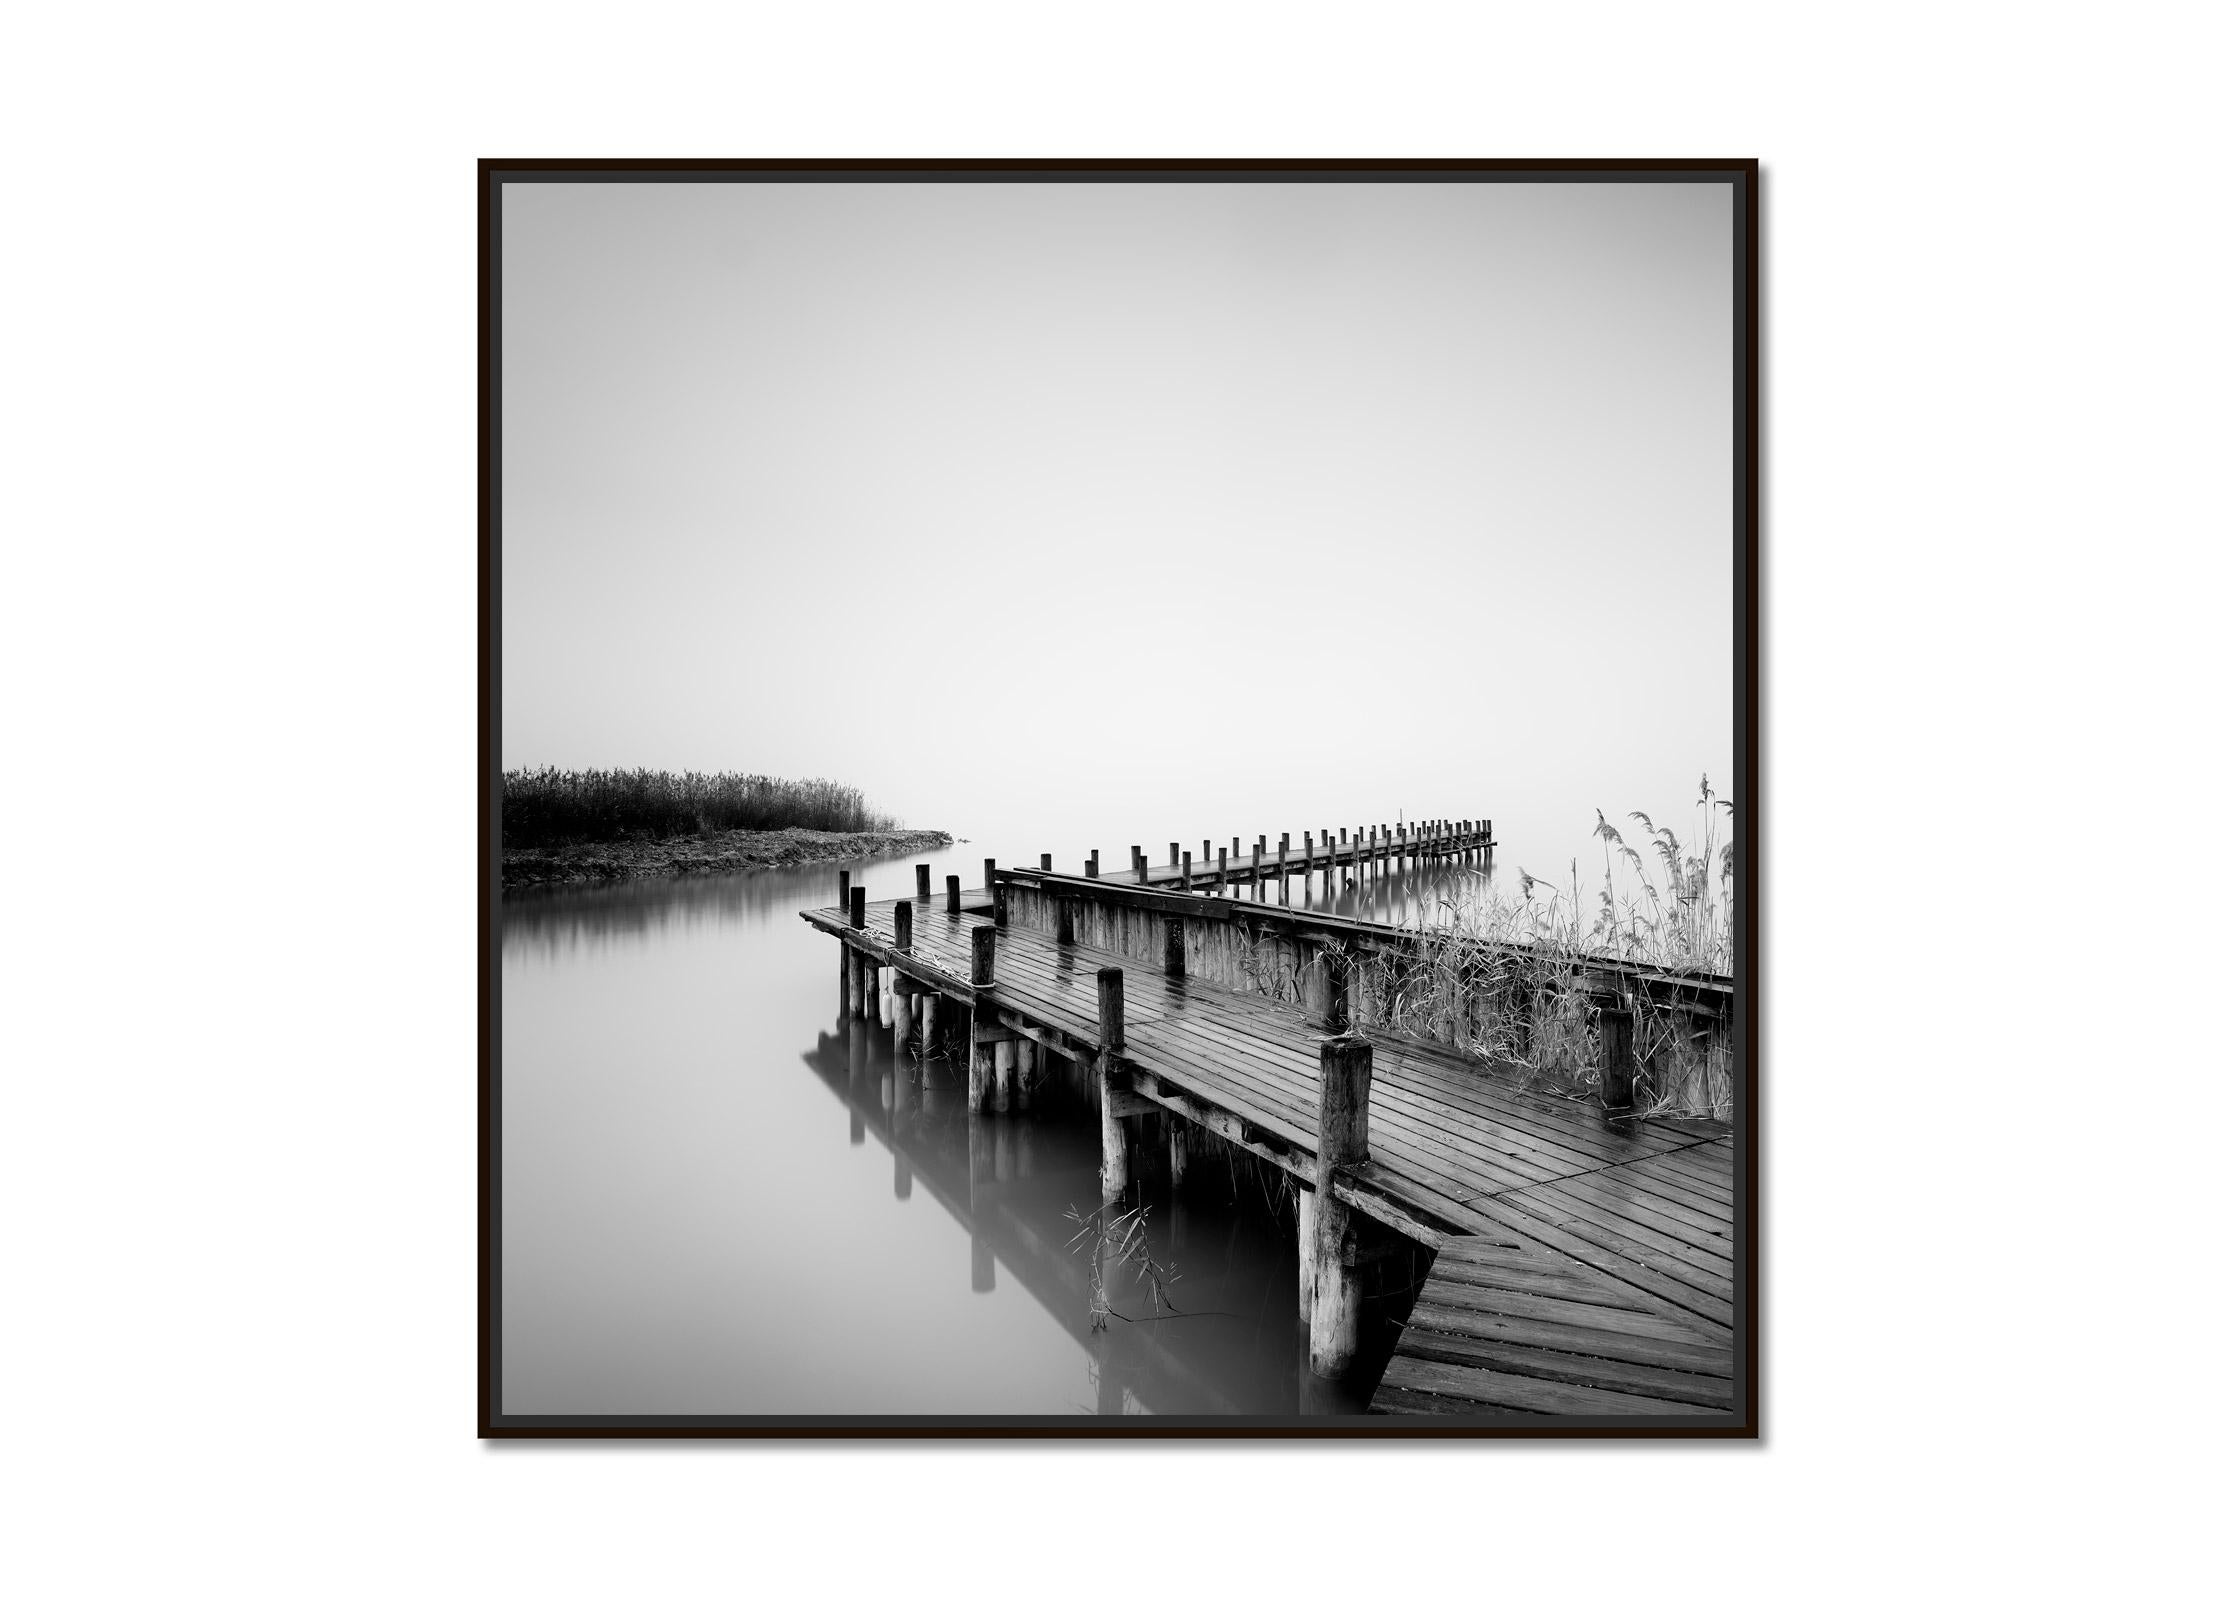 Jetty on calm Lake, foggy morning, black and white, long exposure art waterscape - Photograph by Gerald Berghammer